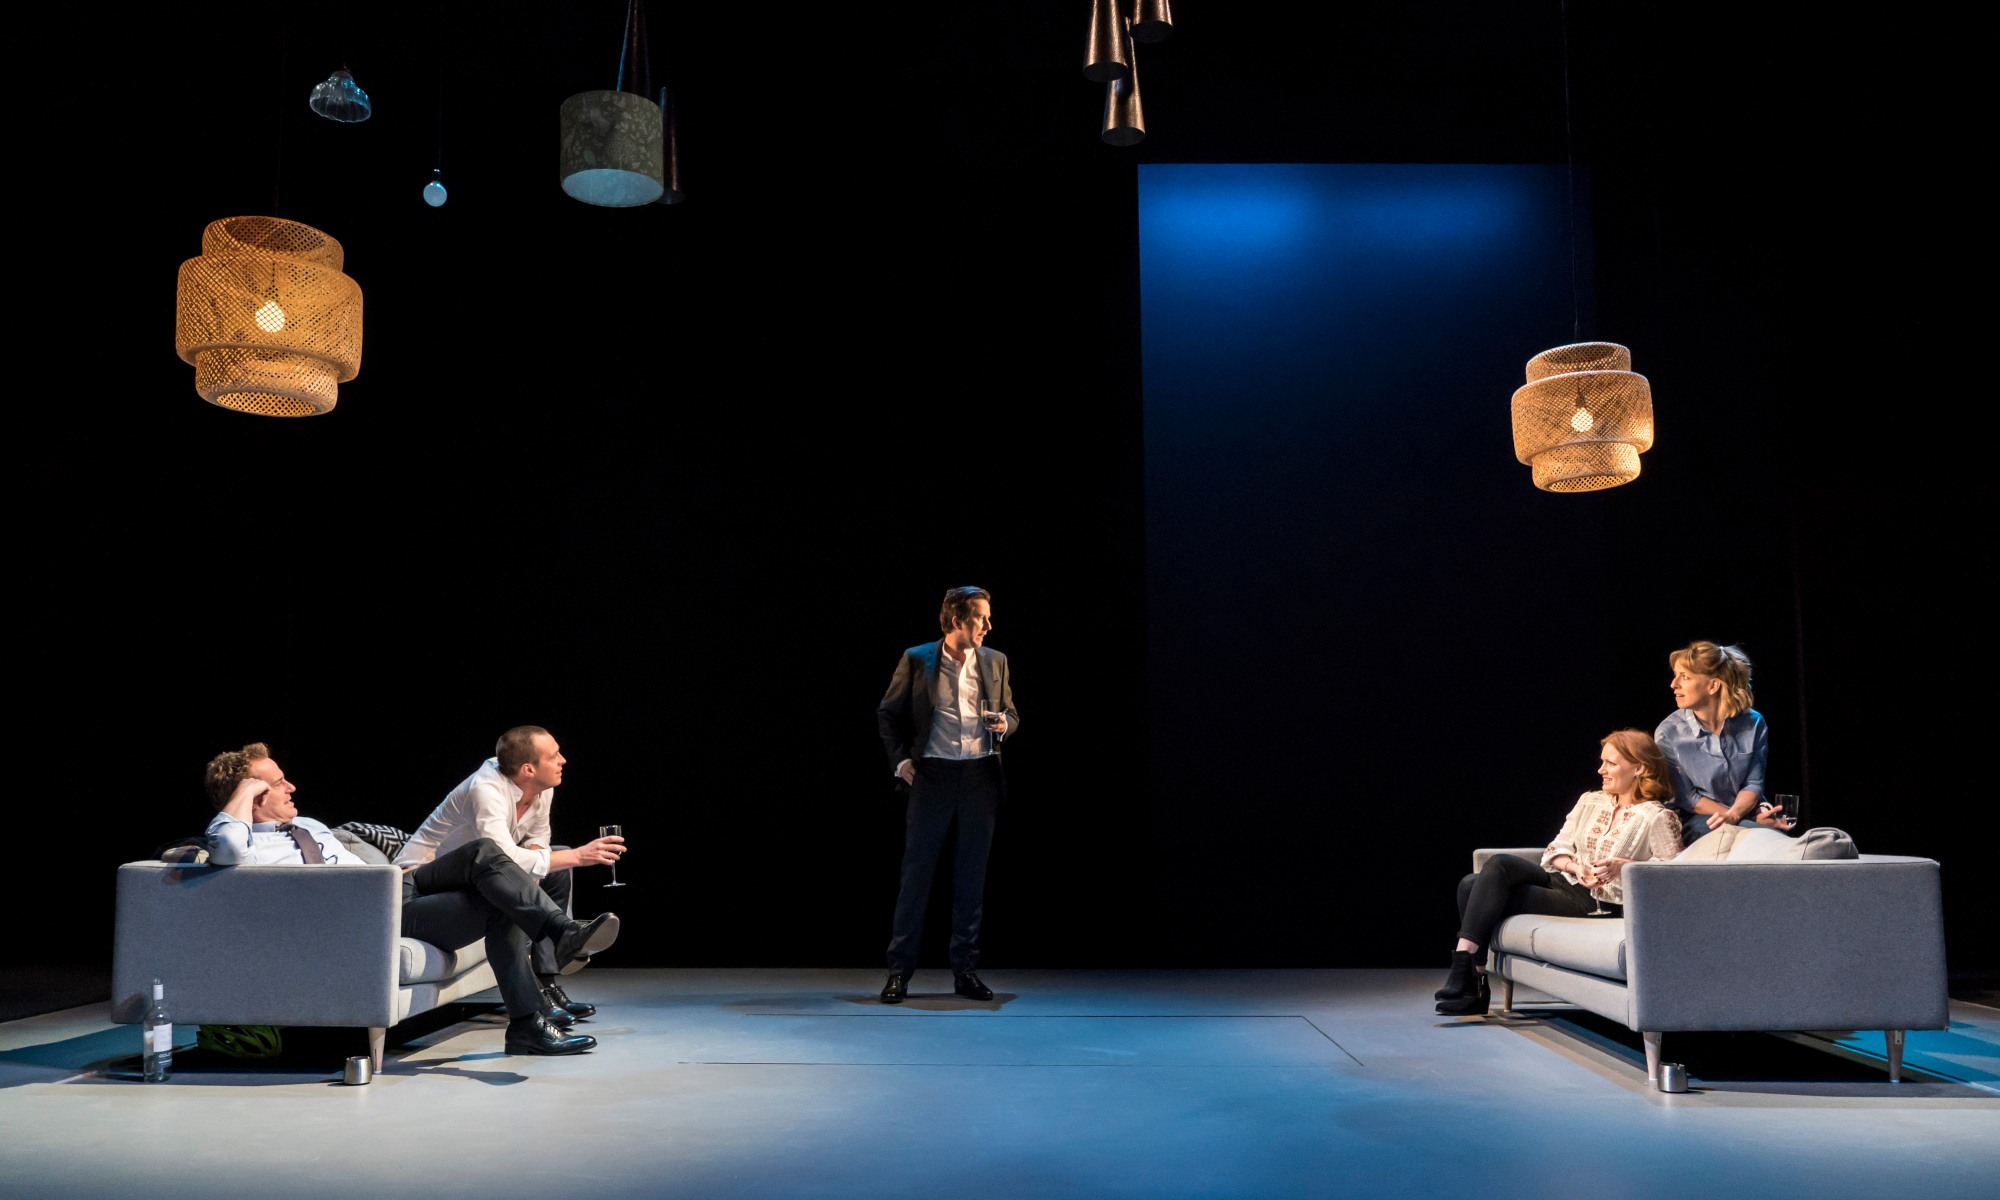 Two sofas are on stage on the far left and far right. Two actors are sitting on each. In the middle is a male who is looking at someone on the right sofa.